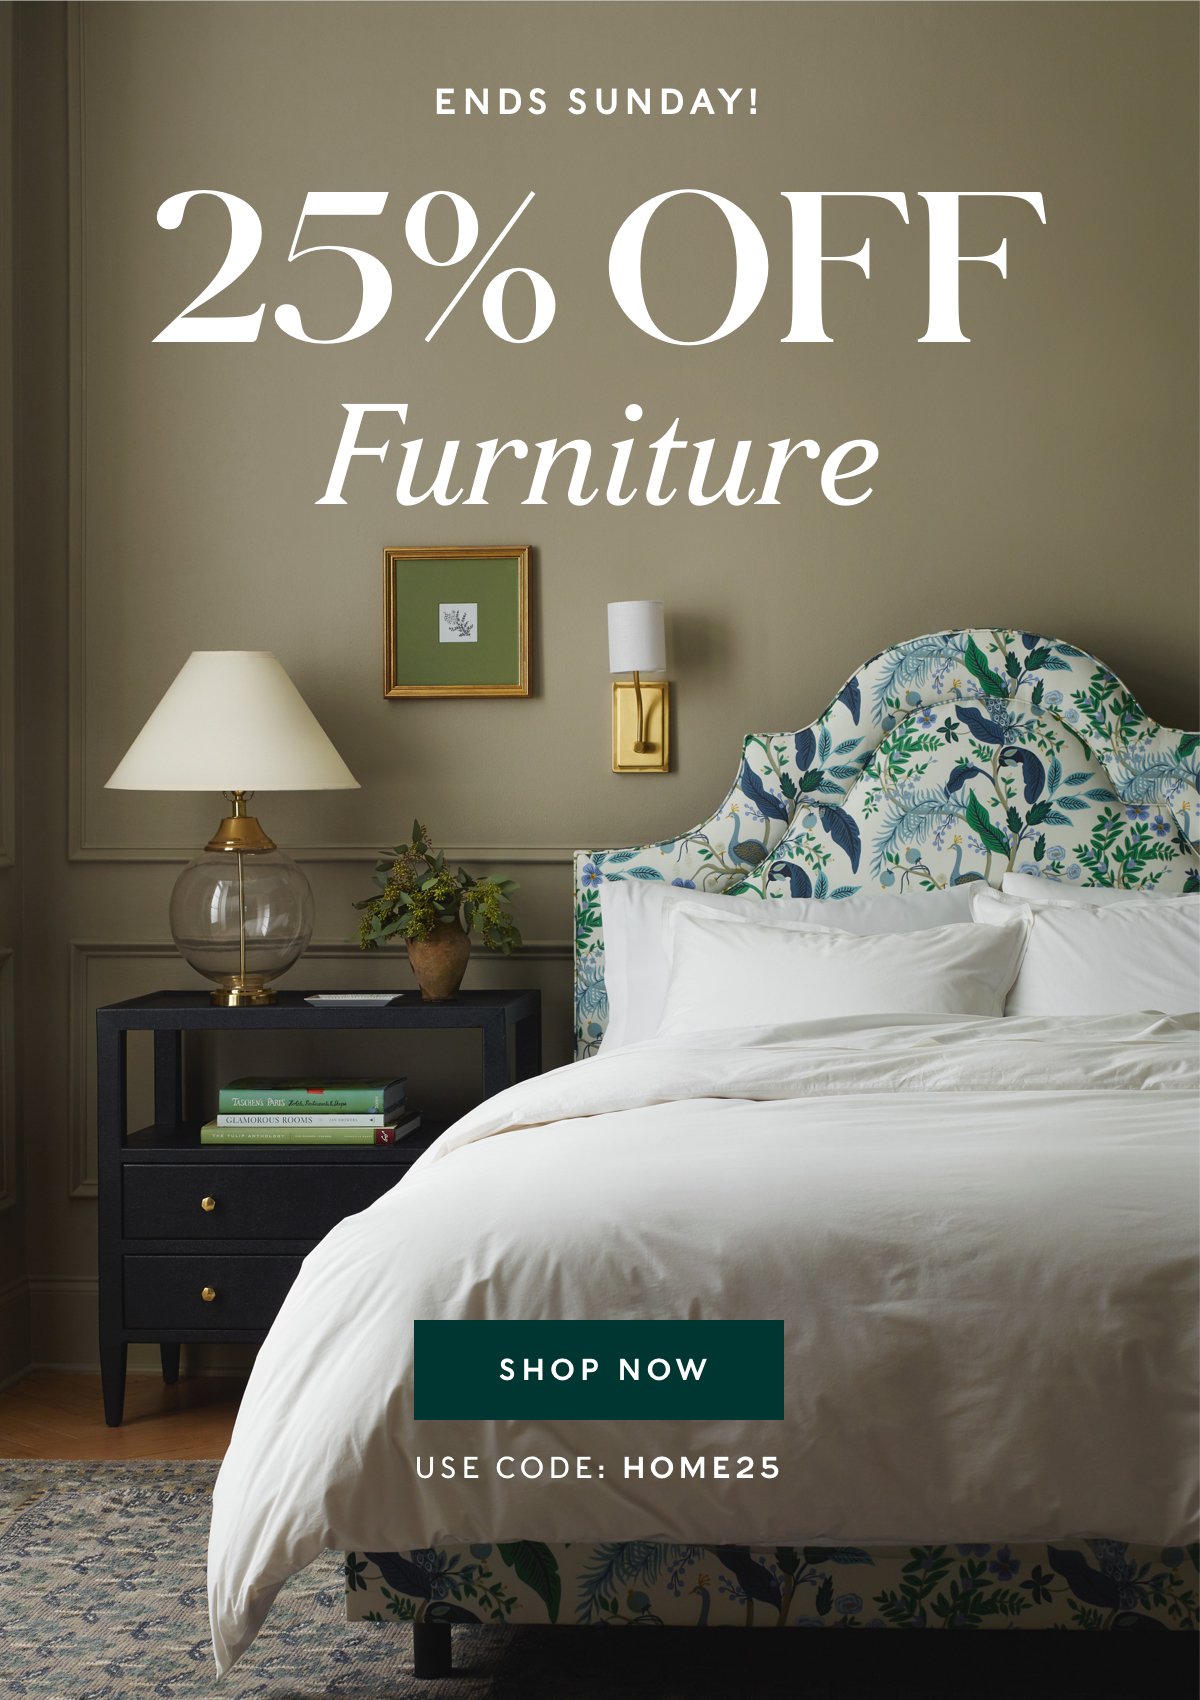 25% off Furniture. Shop now. Use code HOME25